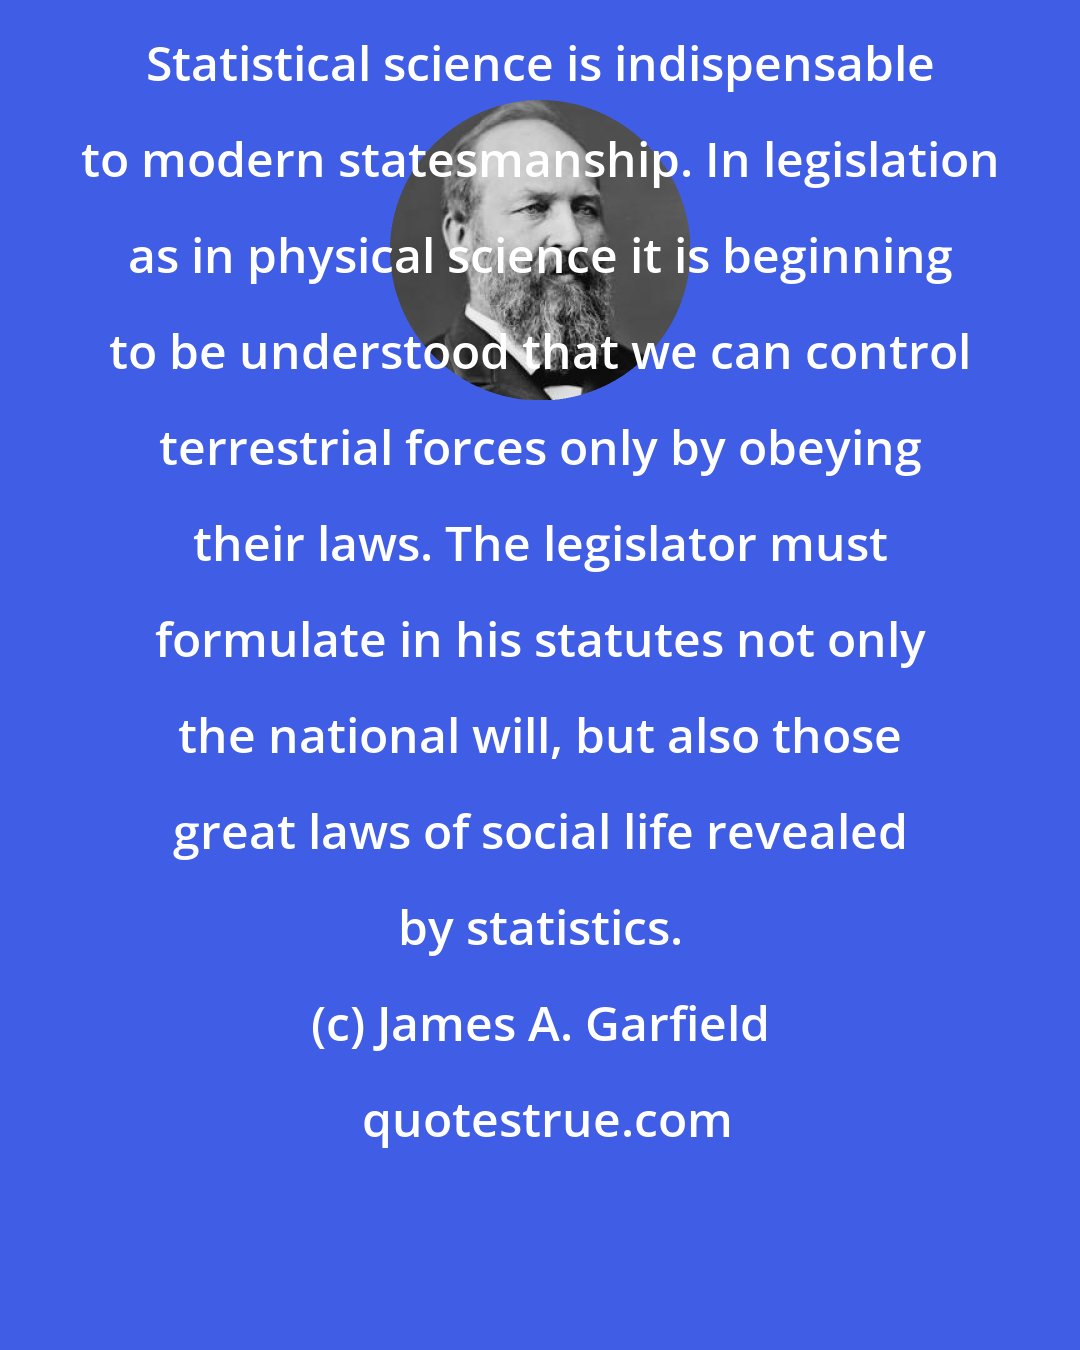 James A. Garfield: Statistical science is indispensable to modern statesmanship. In legislation as in physical science it is beginning to be understood that we can control terrestrial forces only by obeying their laws. The legislator must formulate in his statutes not only the national will, but also those great laws of social life revealed by statistics.